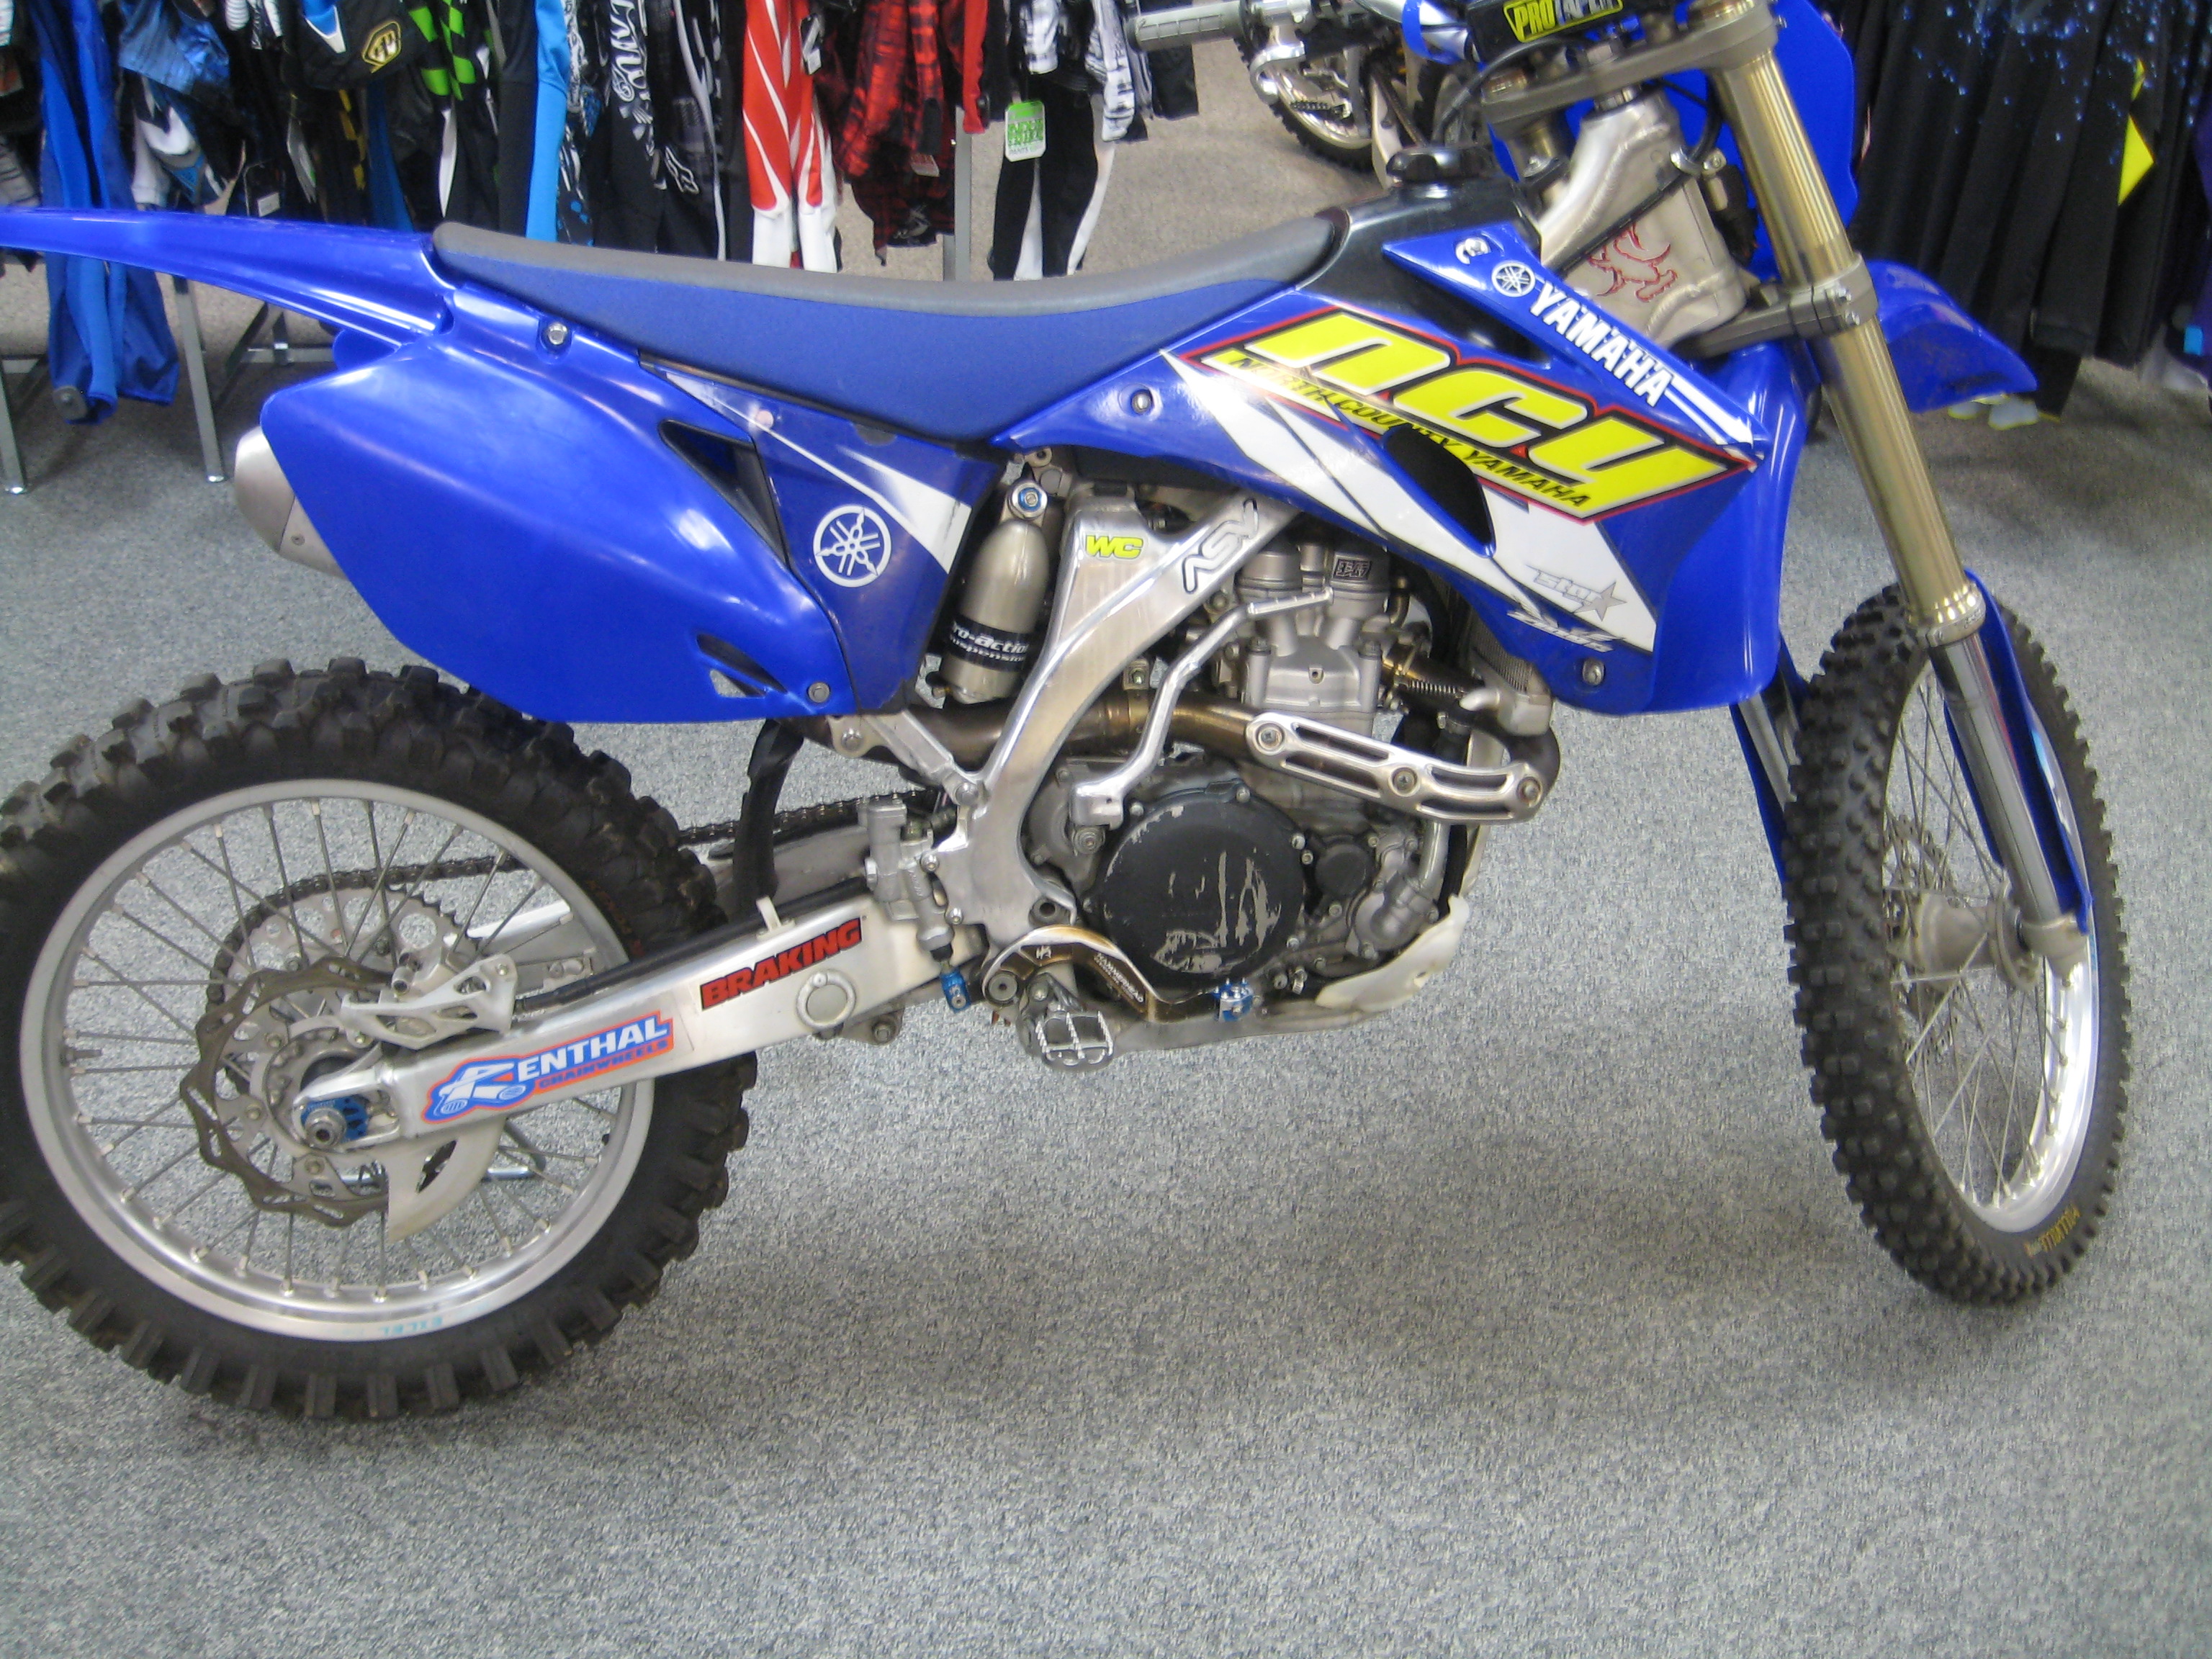 Used/Pre-owned dirt bikes and atvs!